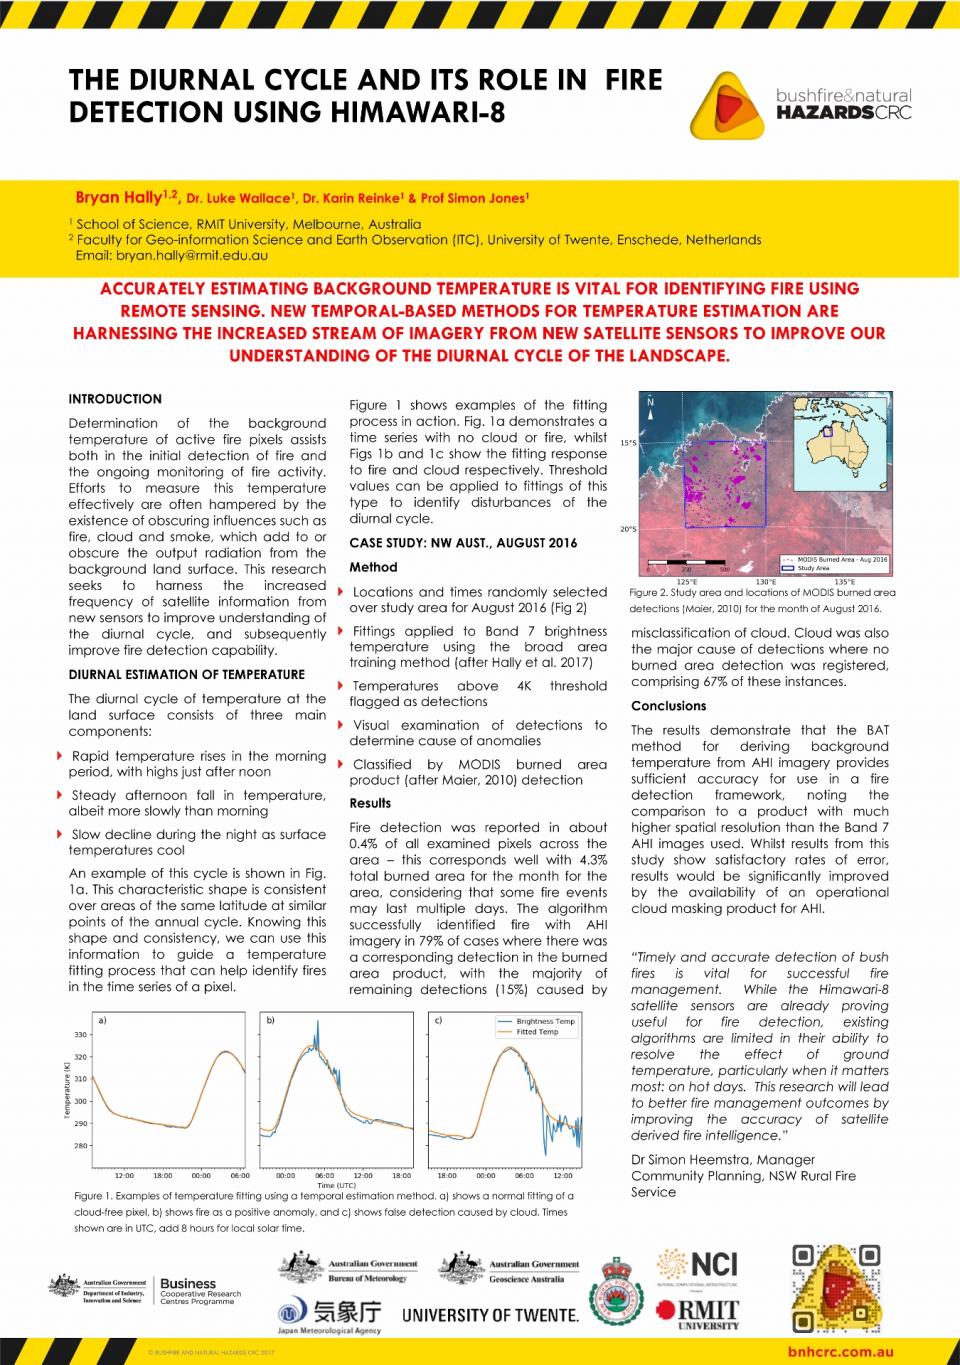 The diurnal cycle and its role in fire detection using Himawari-8